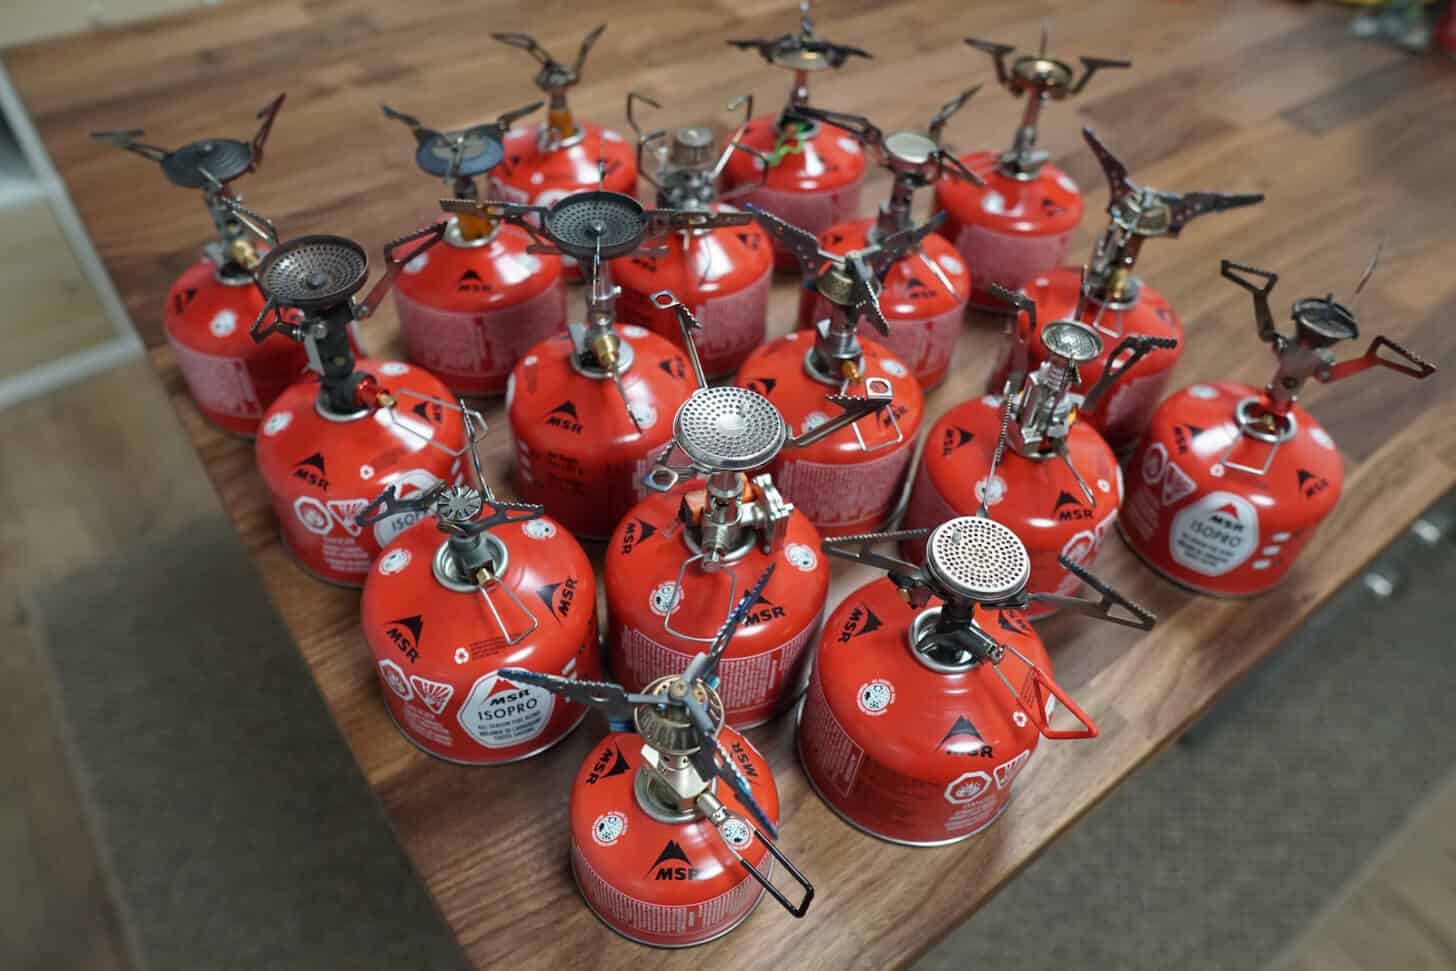 a collection of stoves attached to fuel canisters.